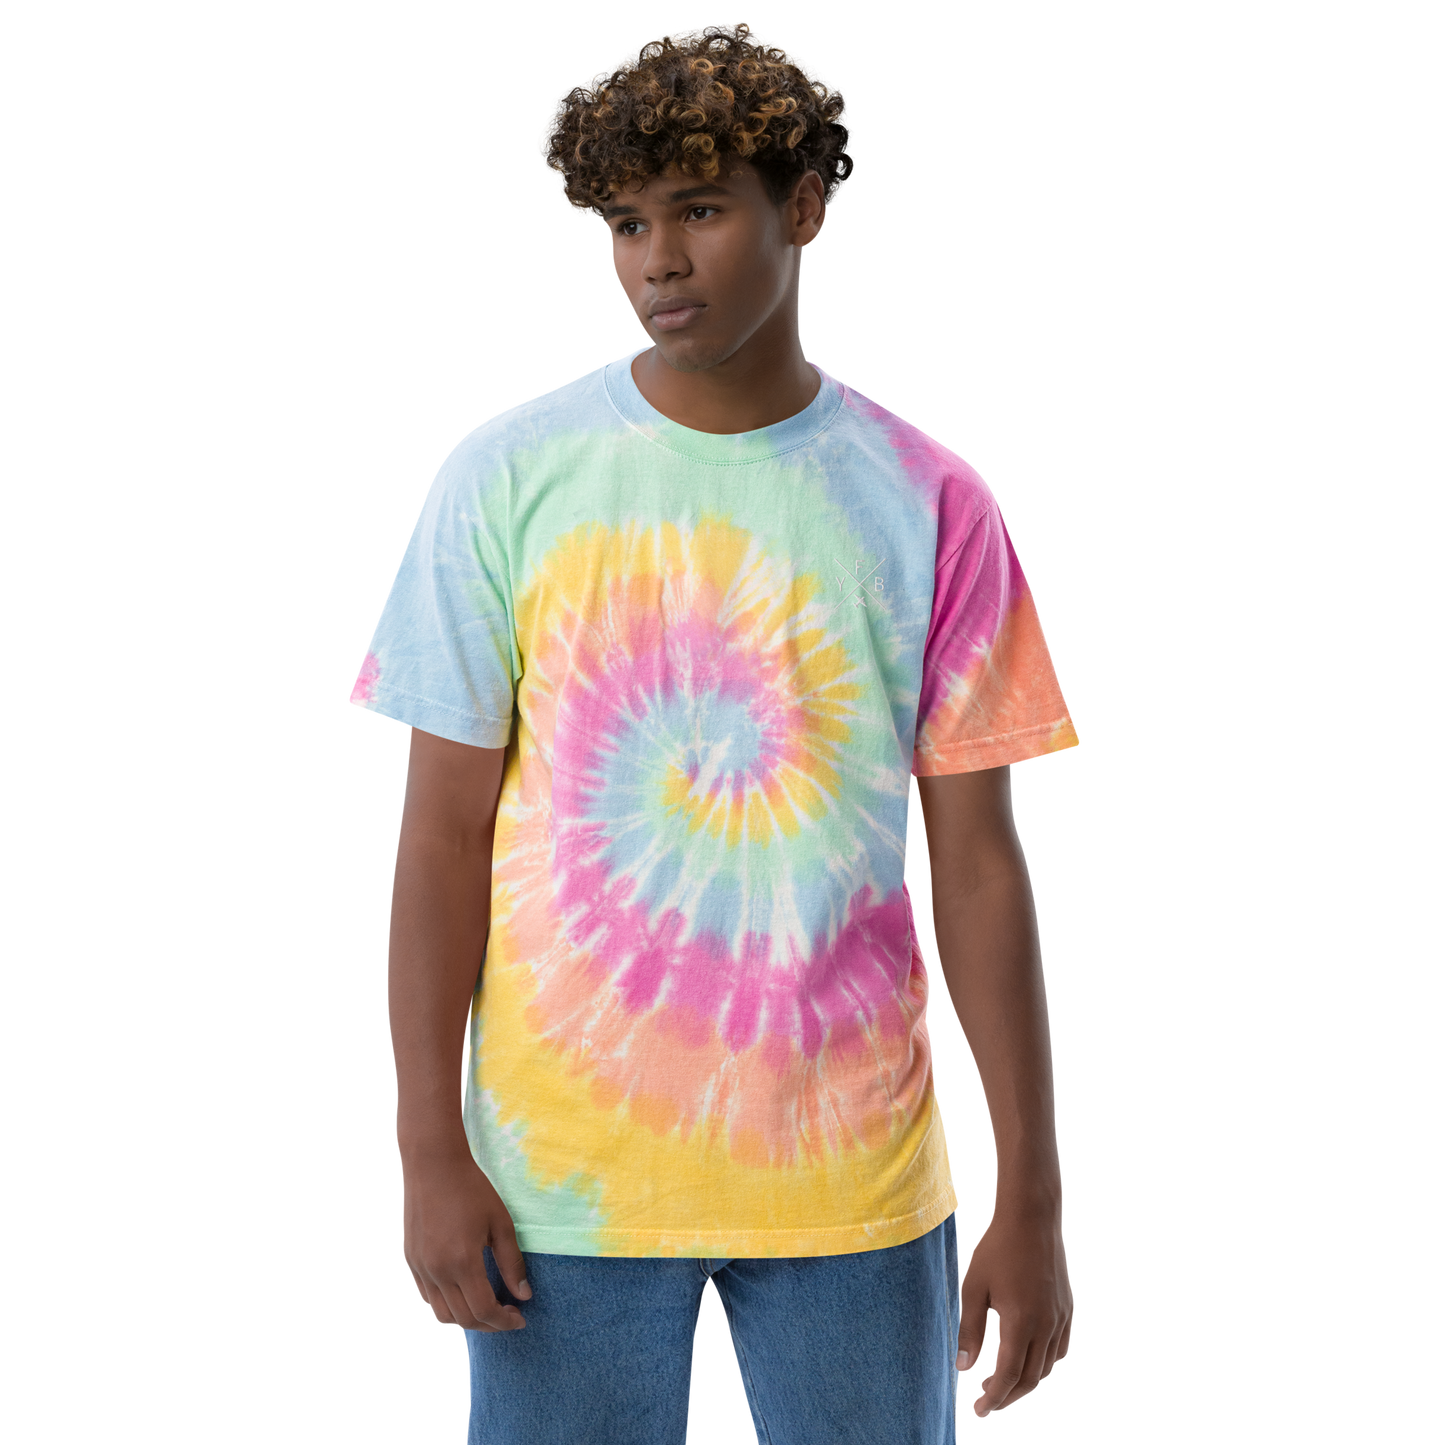 YHM Designs - YFB Iqaluit Oversized Tie-Dye T-Shirt - Crossed-X Design with Airport Code and Vintage Propliner - White Embroidery - Image 04